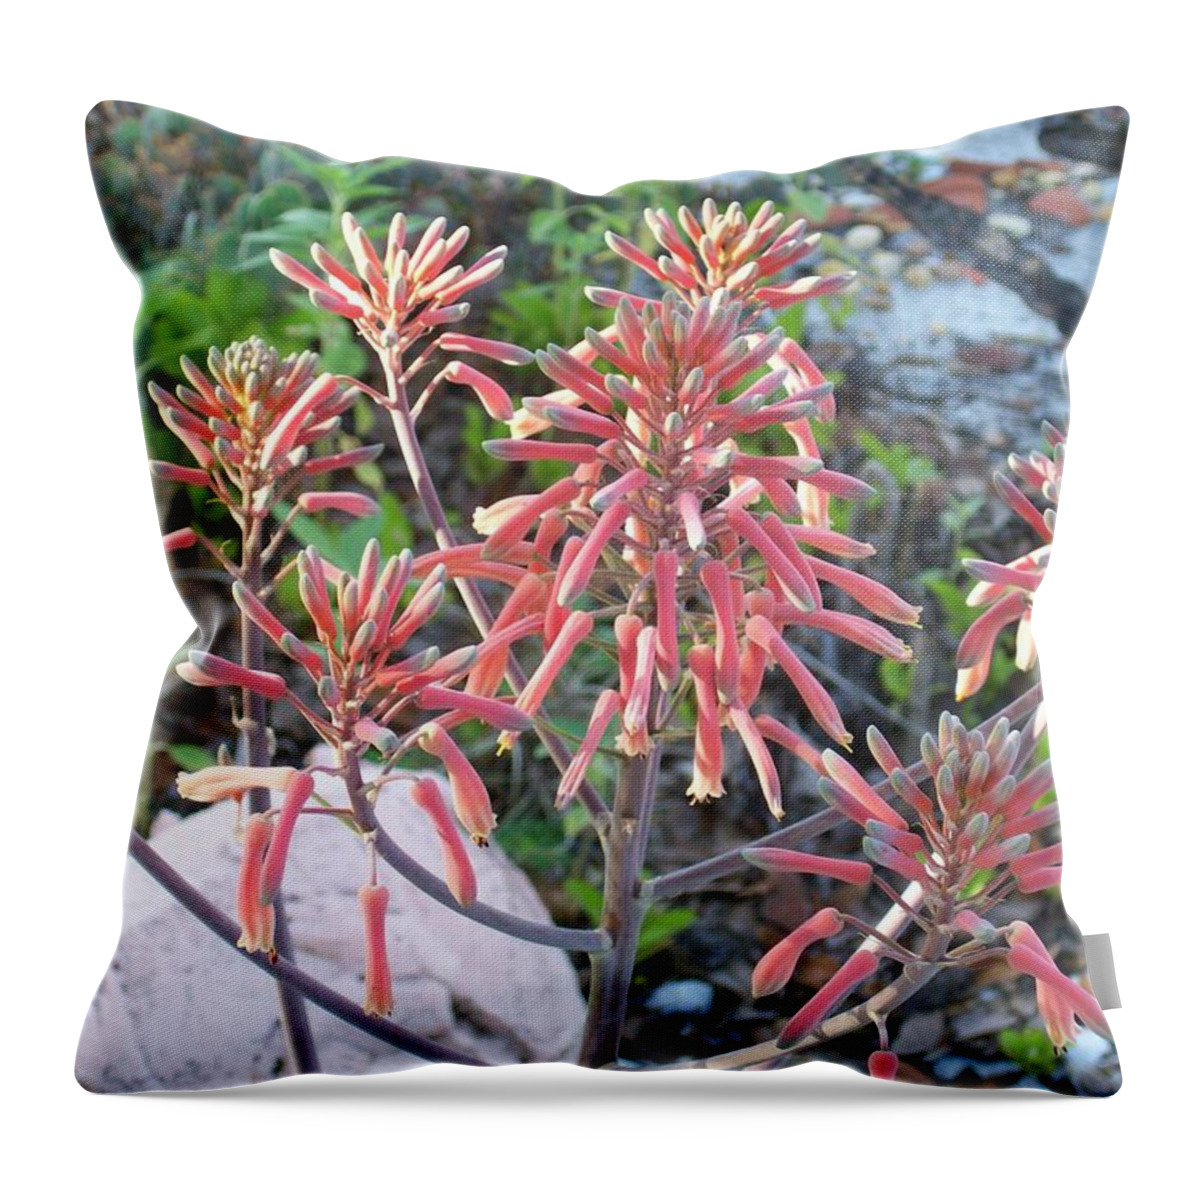 Succulent Aloe Plant With Mature Throw Pillow featuring the photograph Aloe in Bloom by Belinda Lee